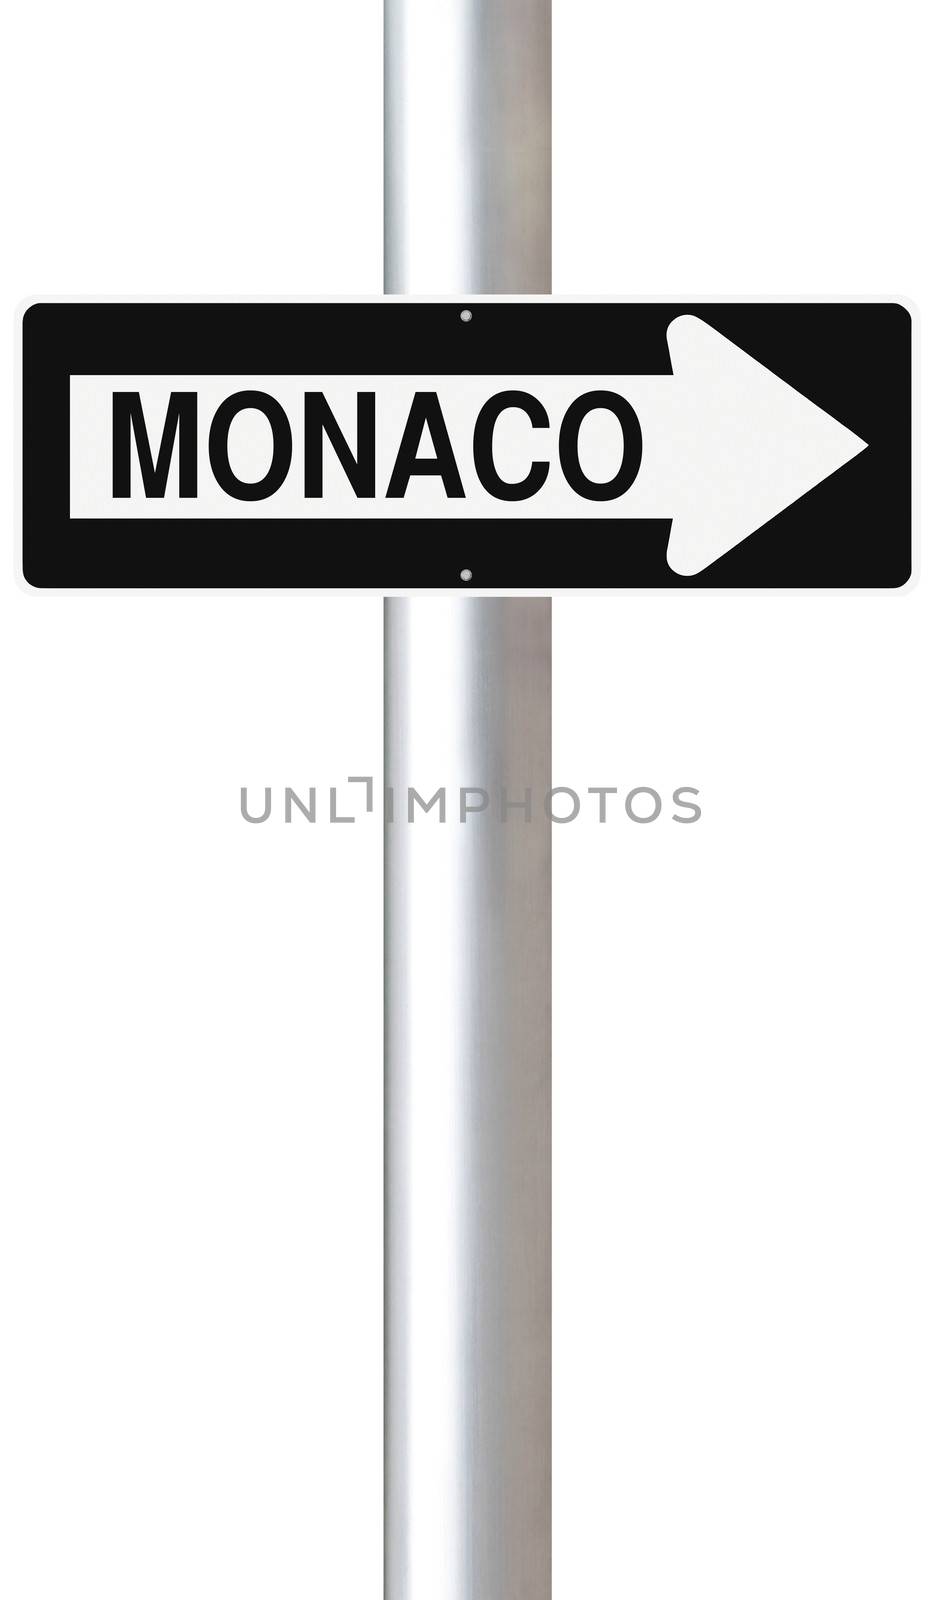 A modified one way sign indicating Monaco